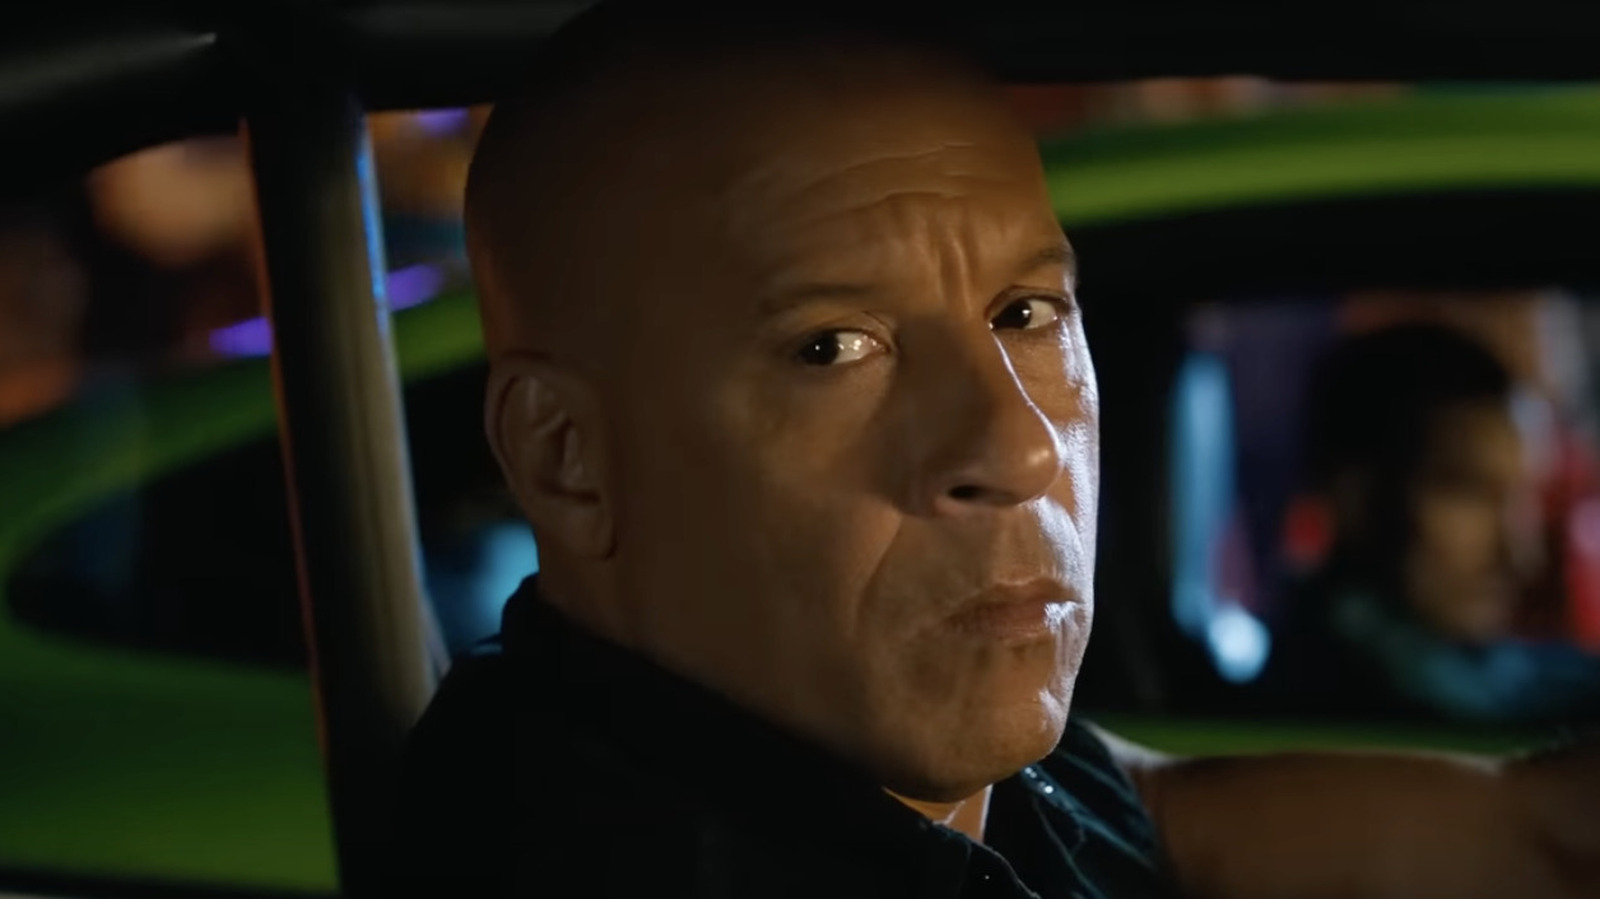 Fast X: The new Fast and Furious movie's cameos, resurrections